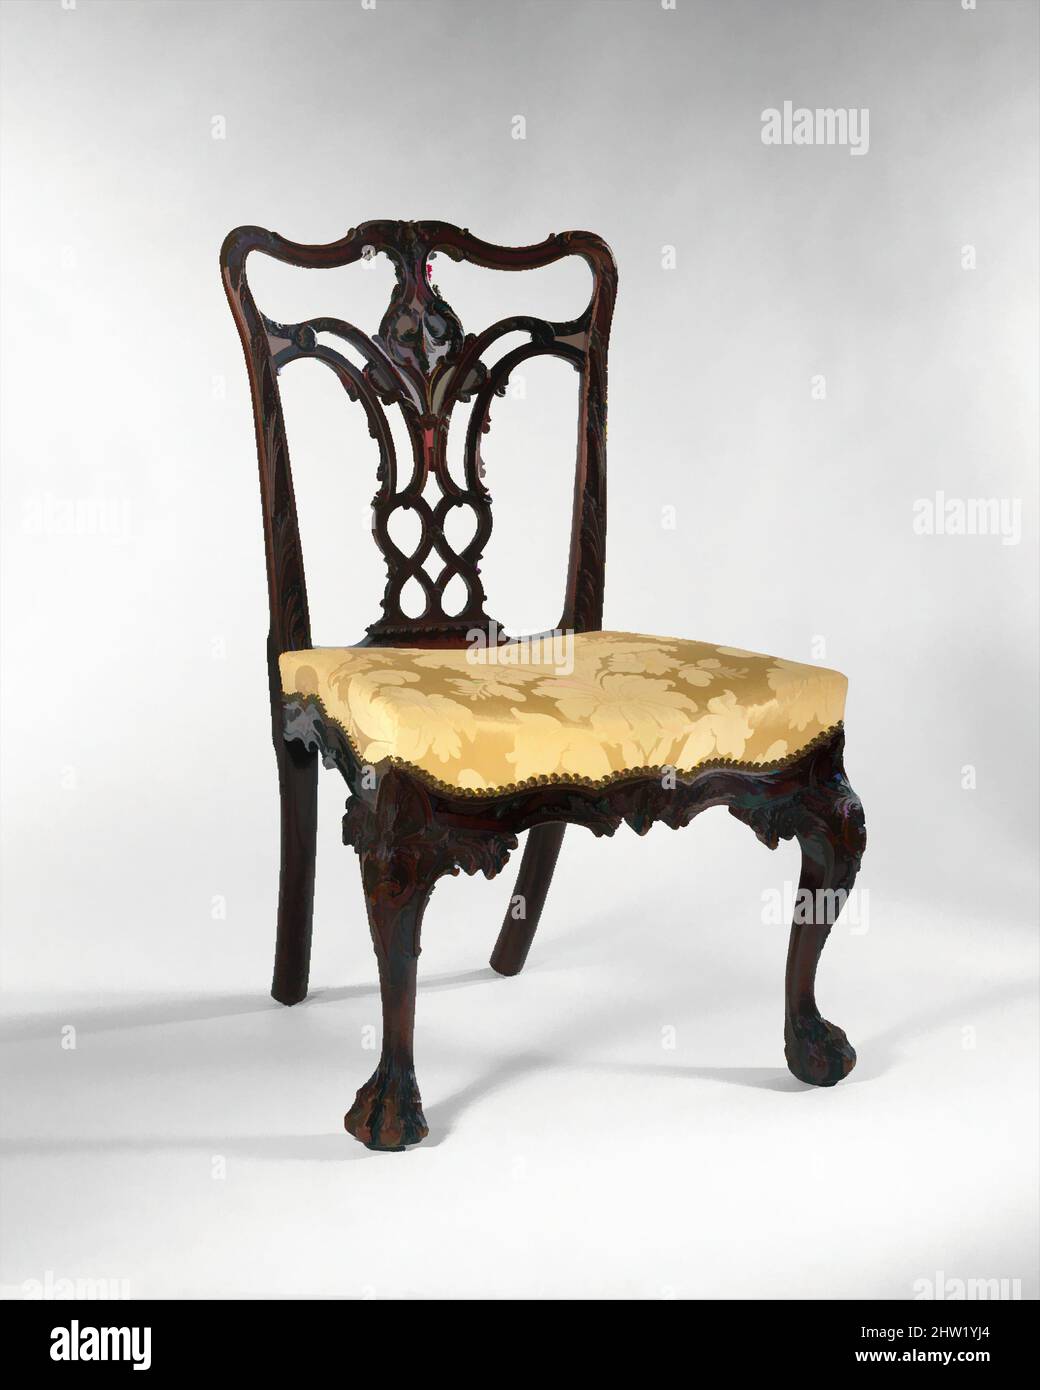 Art inspired by Side Chair, ca. 1770, Made in Philadelphia, Pennsylvania, United States, American, Mahogany, northern white cedar, 37 x 22 1/2 x 23 in. (94 x 57.2 x 58.4 cm), Furniture, Attributed to Thomas Affleck (1740–1795), This magnificently carved chair is part of a suite of, Classic works modernized by Artotop with a splash of modernity. Shapes, color and value, eye-catching visual impact on art. Emotions through freedom of artworks in a contemporary way. A timeless message pursuing a wildly creative new direction. Artists turning to the digital medium and creating the Artotop NFT Stock Photo